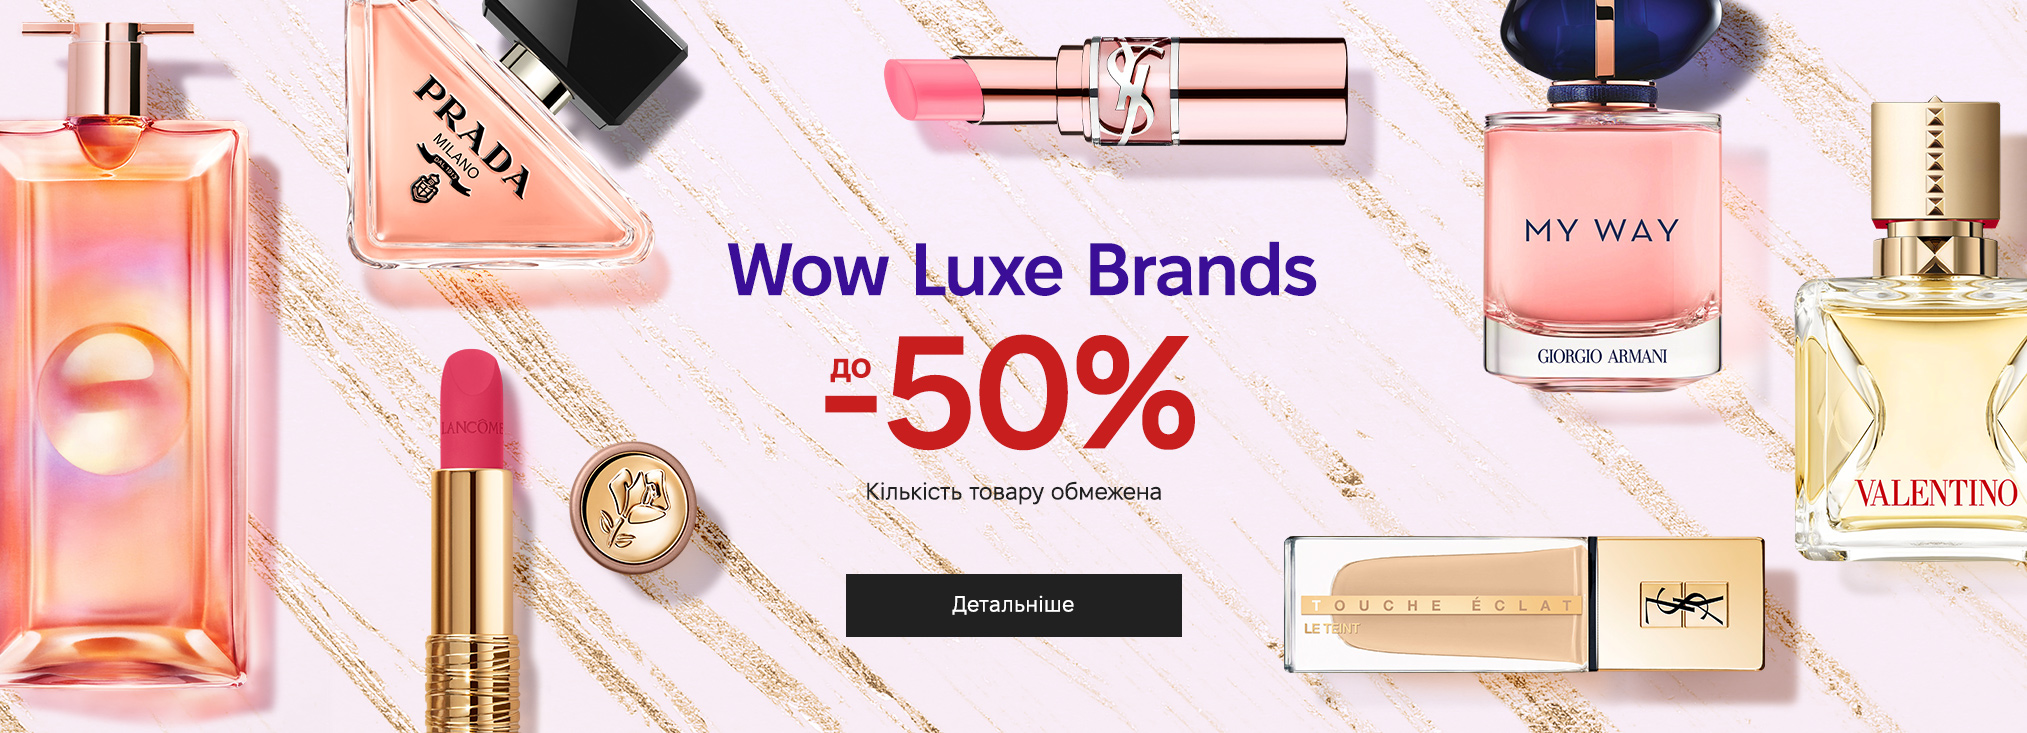 Wow Luxe Brands 3